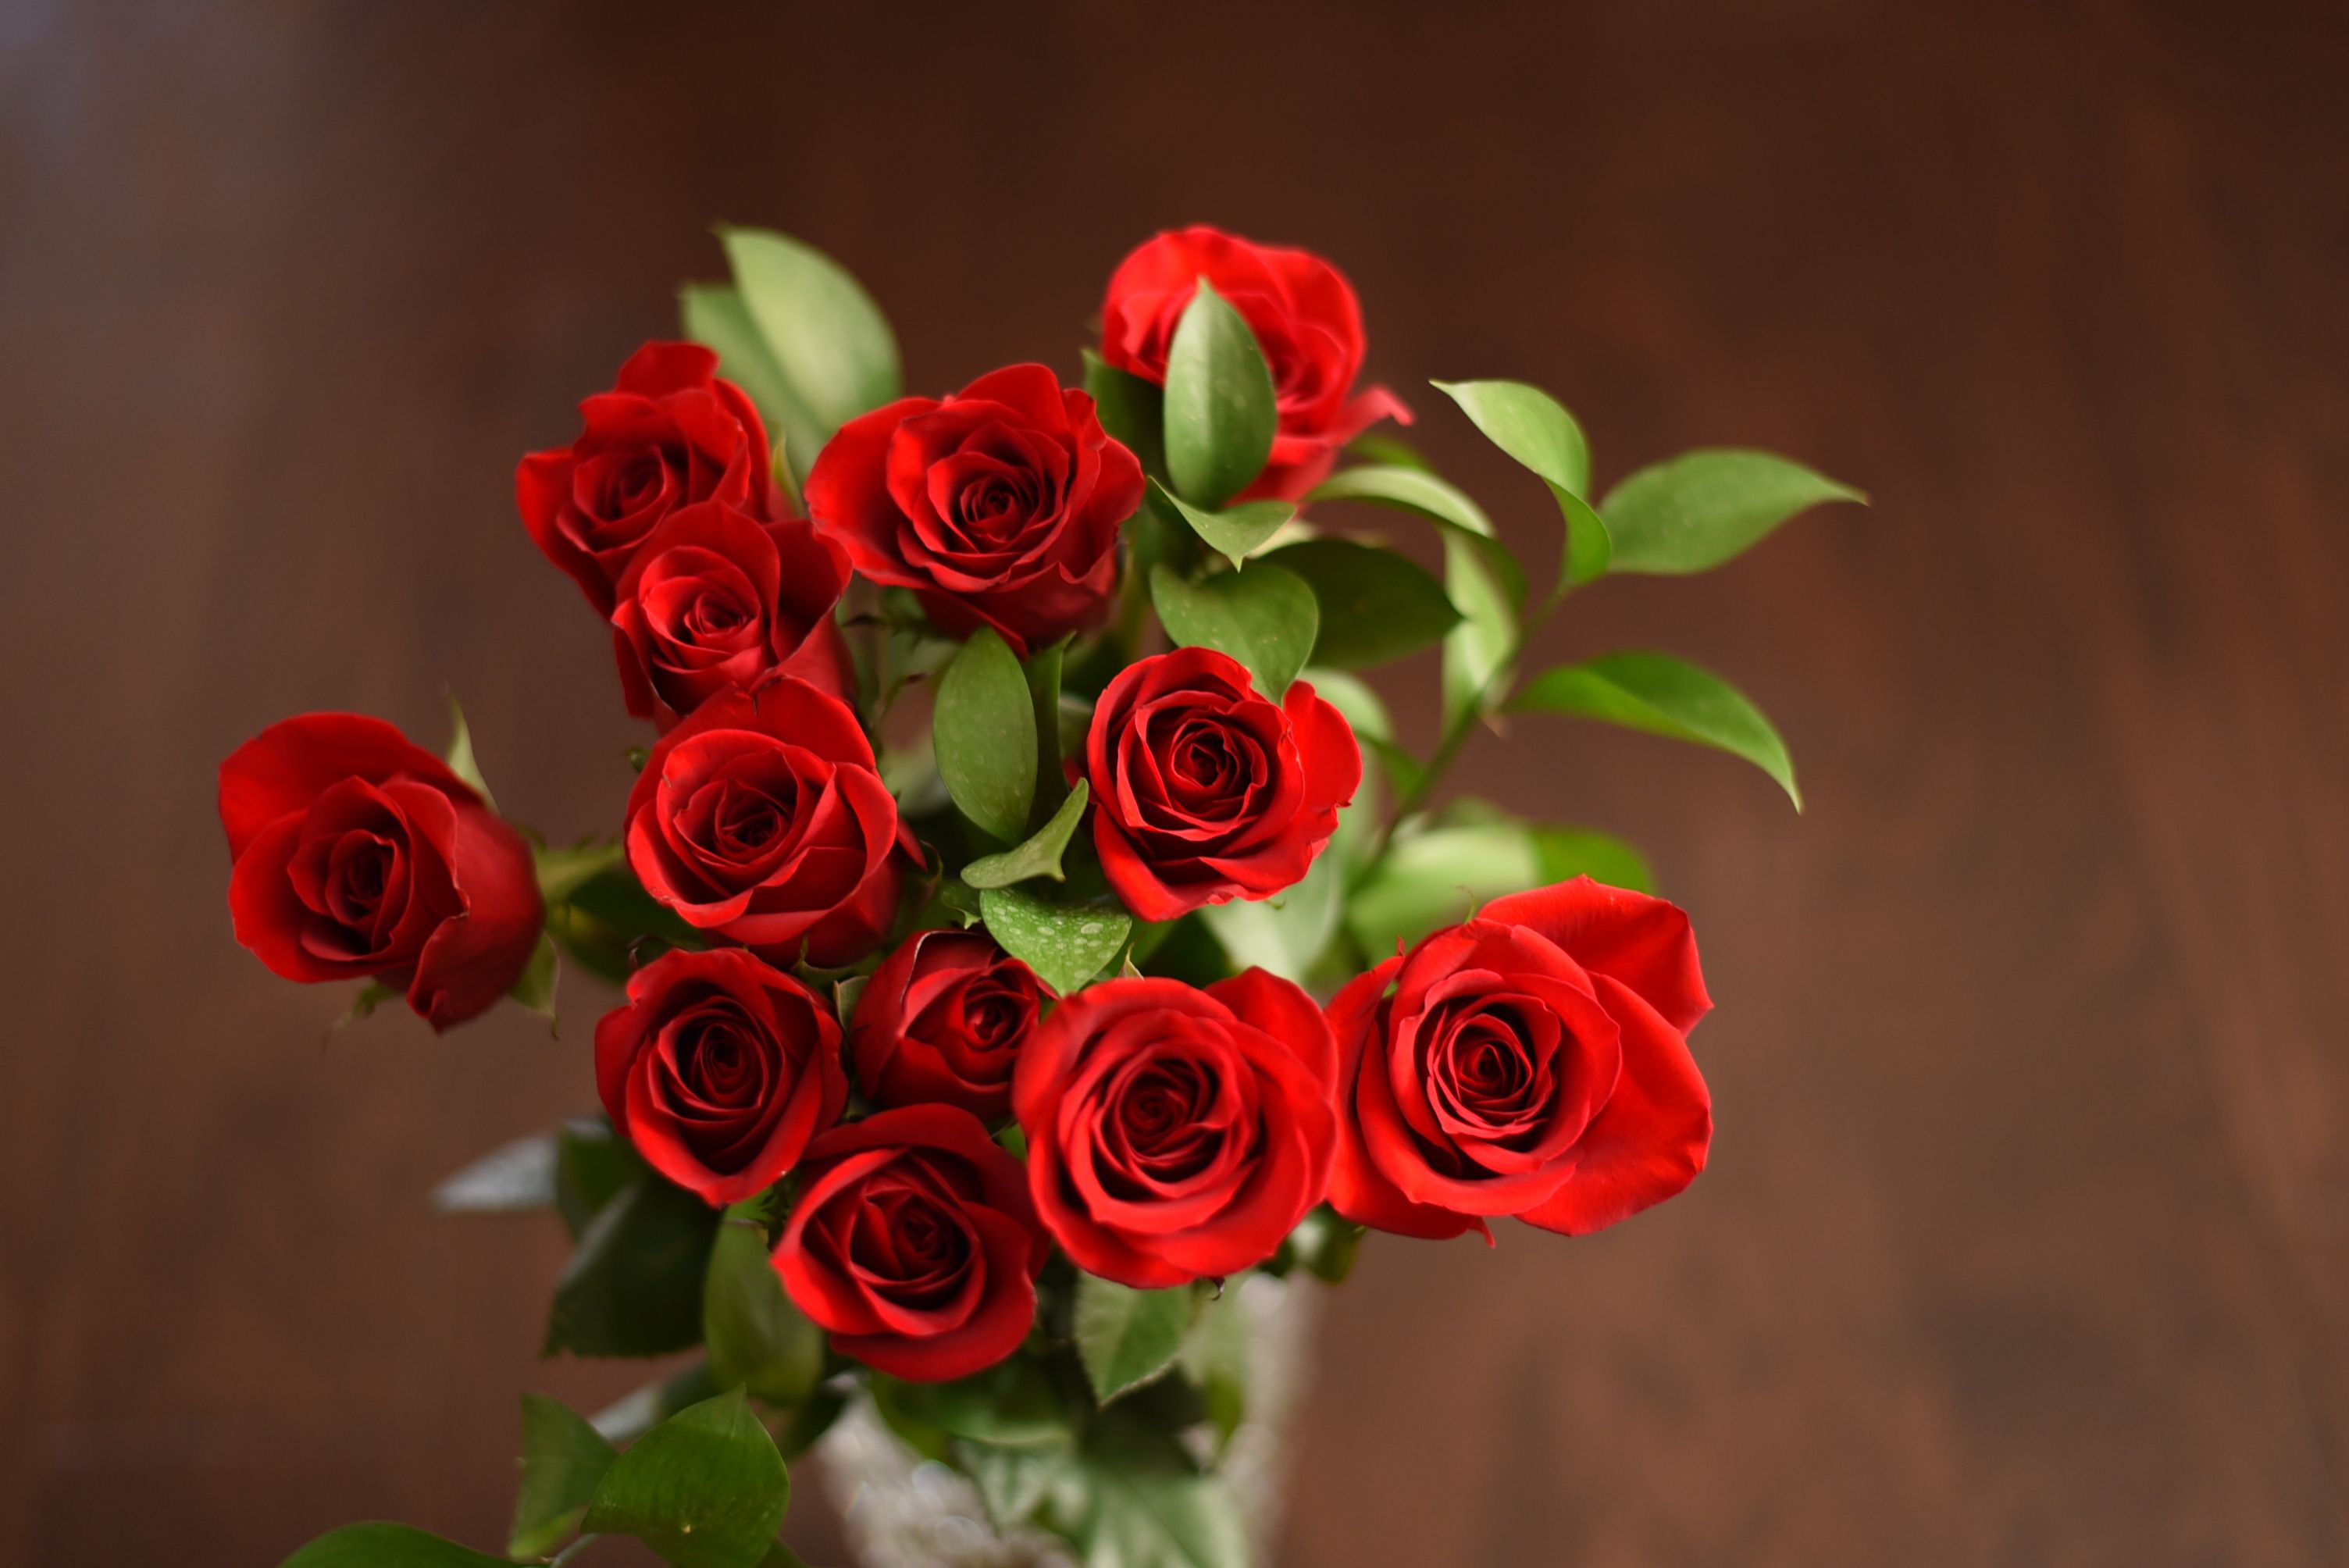 6 ways to make your Valentine's Day roses last longer